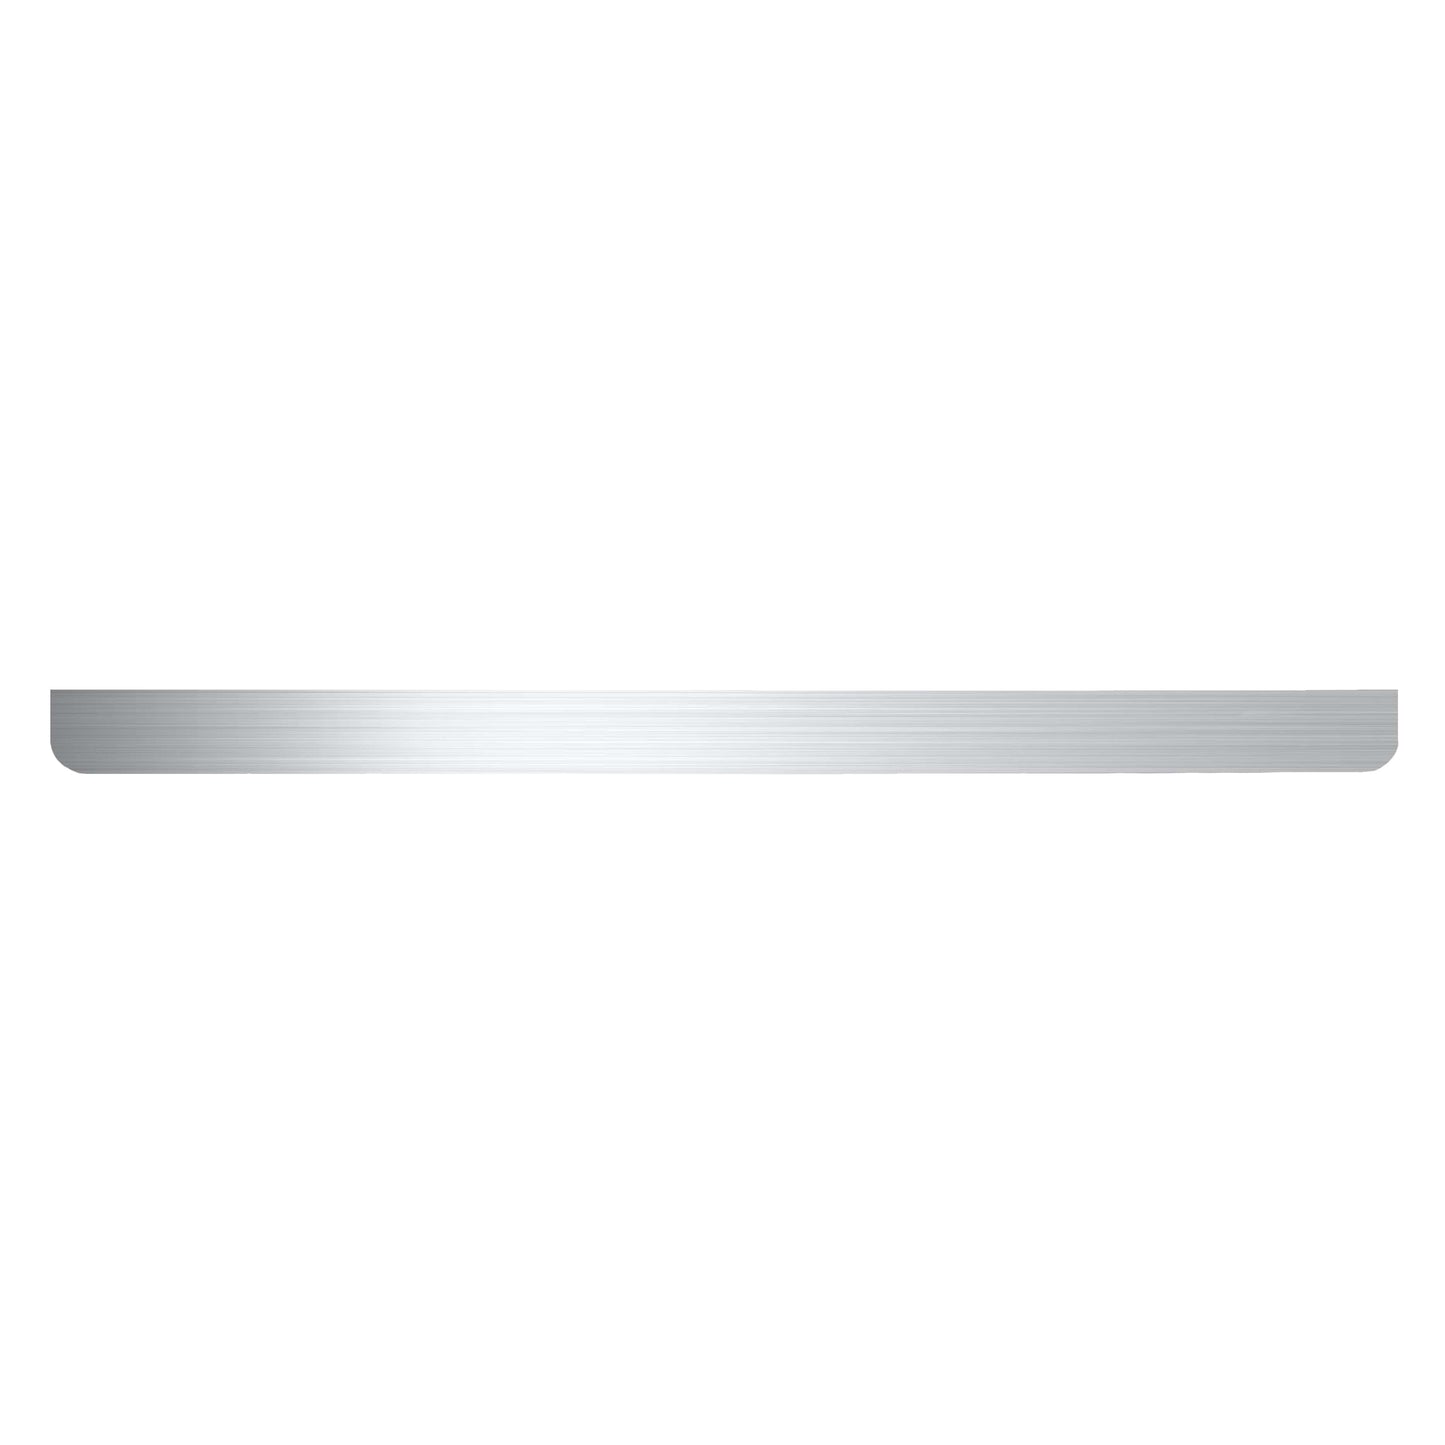 Future-Sales-Stock-Face-Plate-stainless-steel-brushed-finish-Height-6-Width-94-backer-plate-SS-BLANK-B